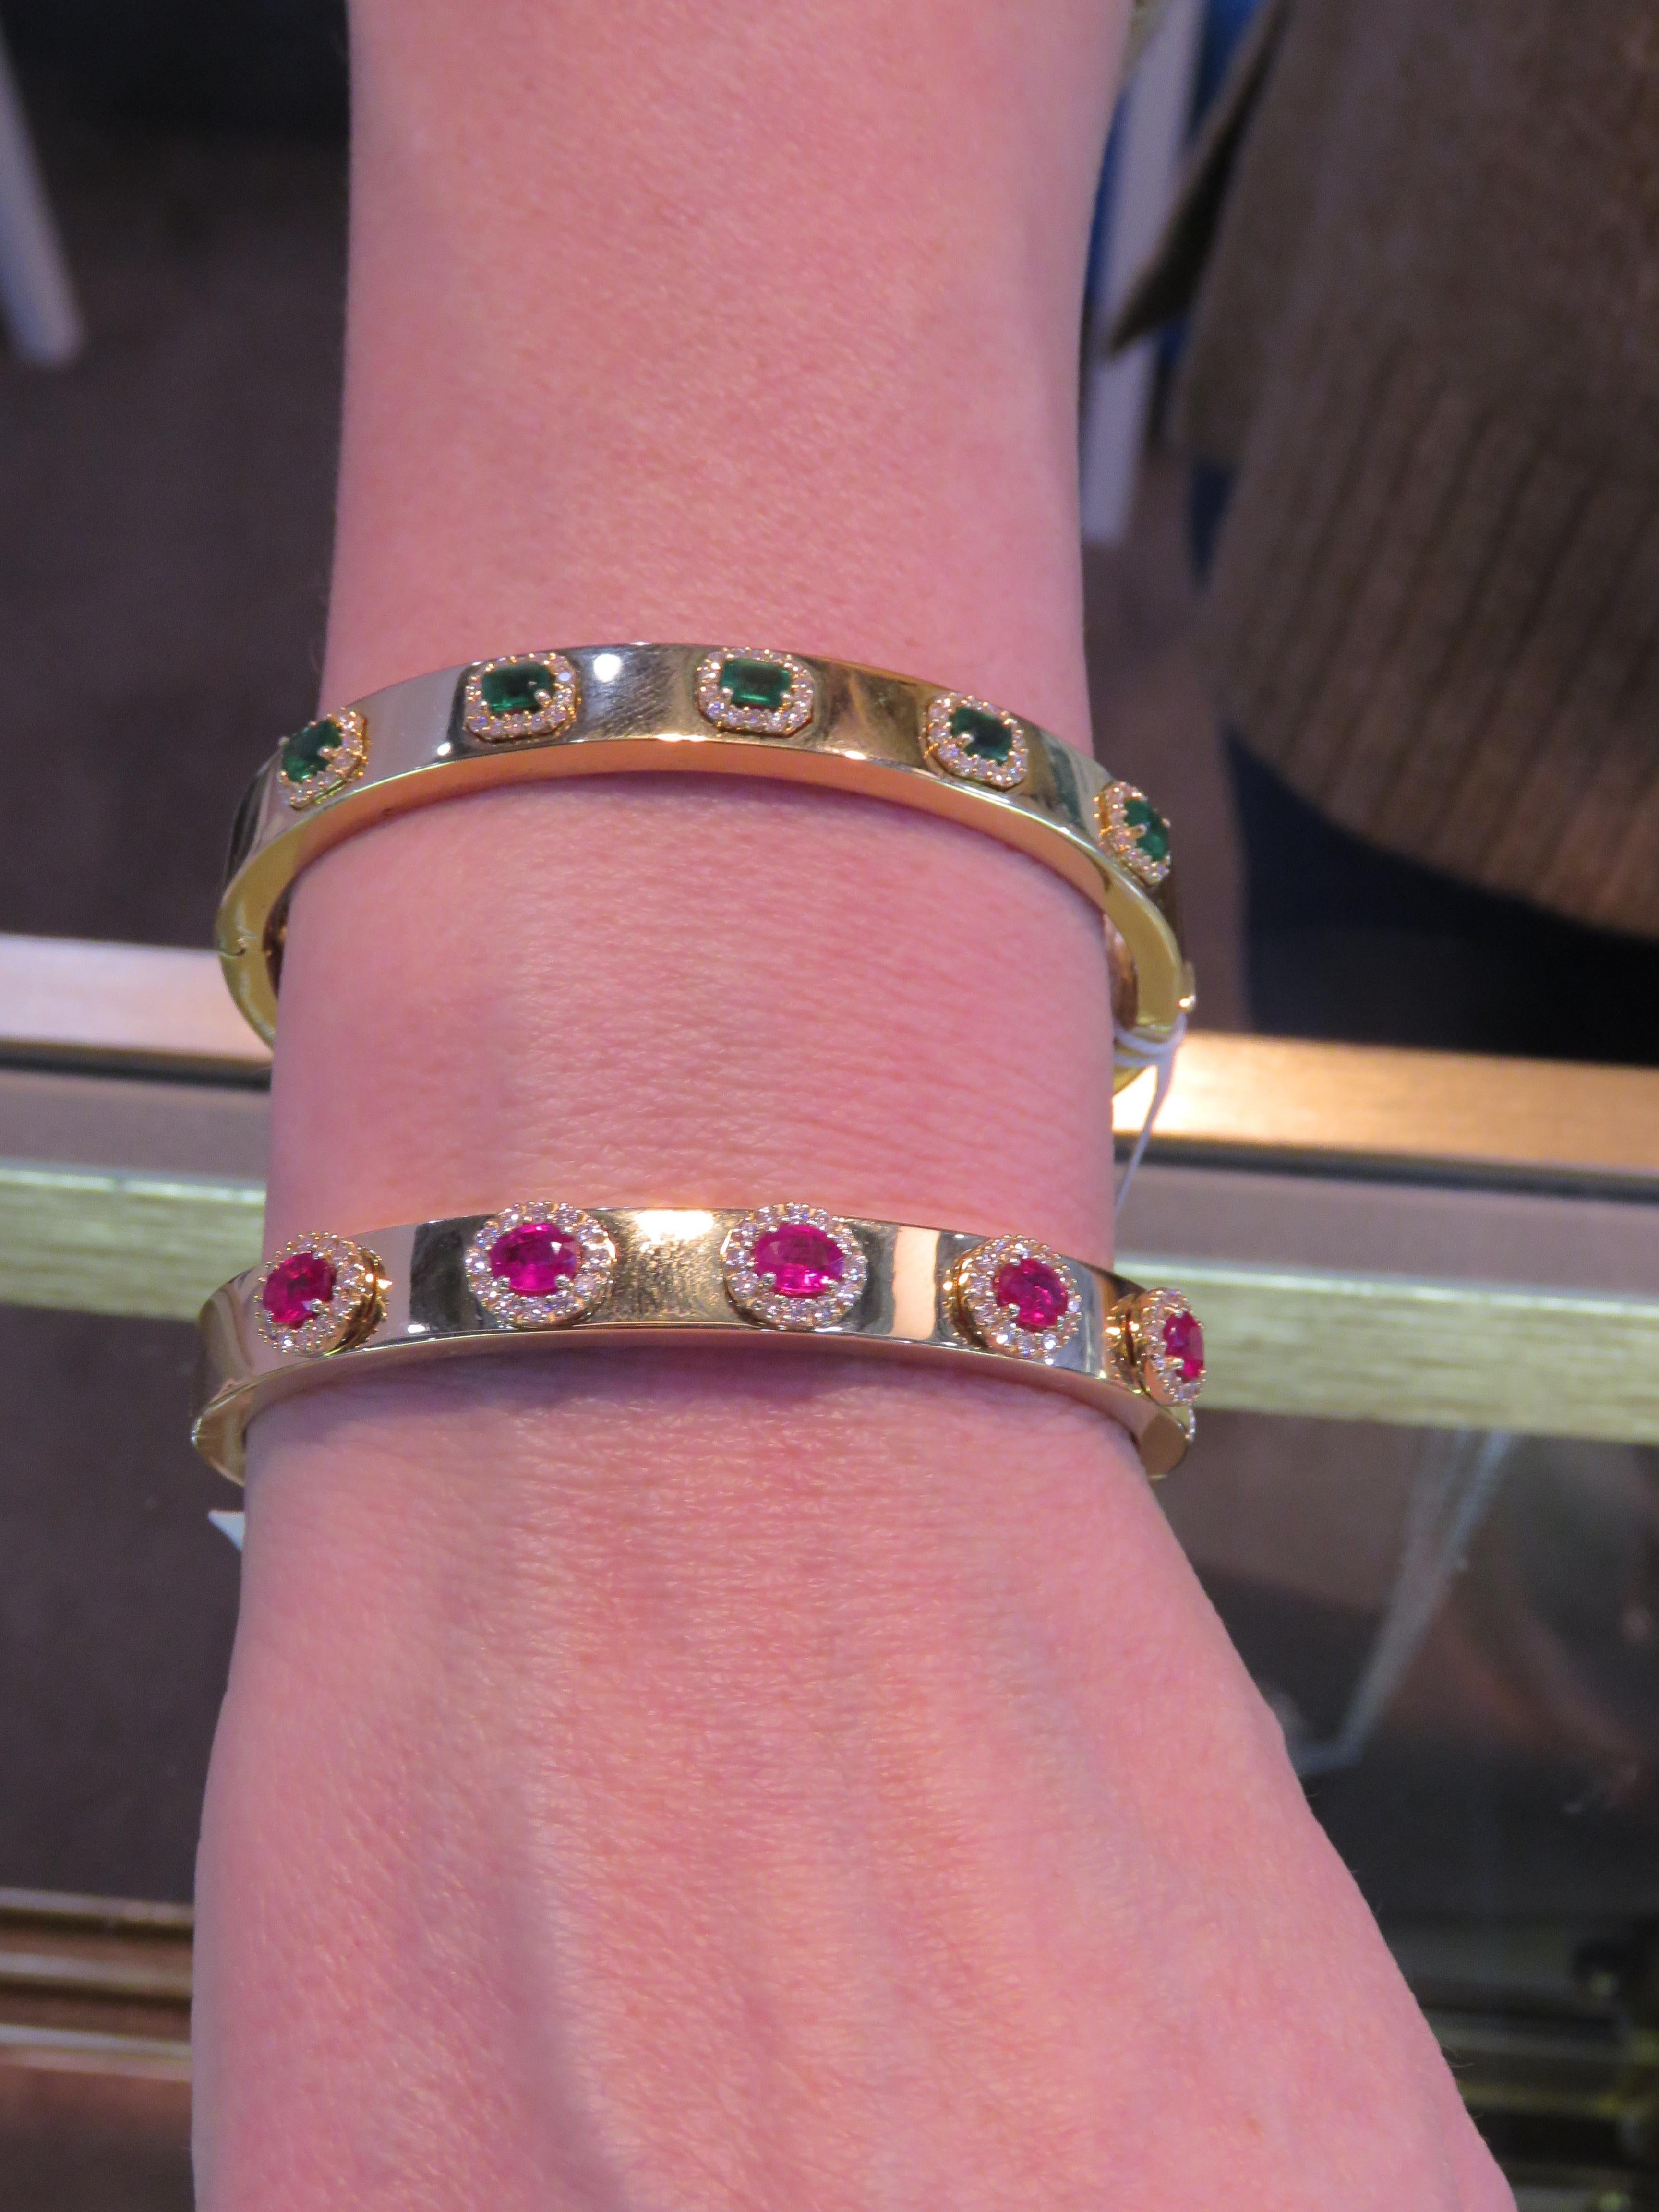 Mixed Cut Pair of NWT $17, 900 18KT Fancy Ruby Diamond & NWT $16, 900 Bracelet Bangle Cuff For Sale